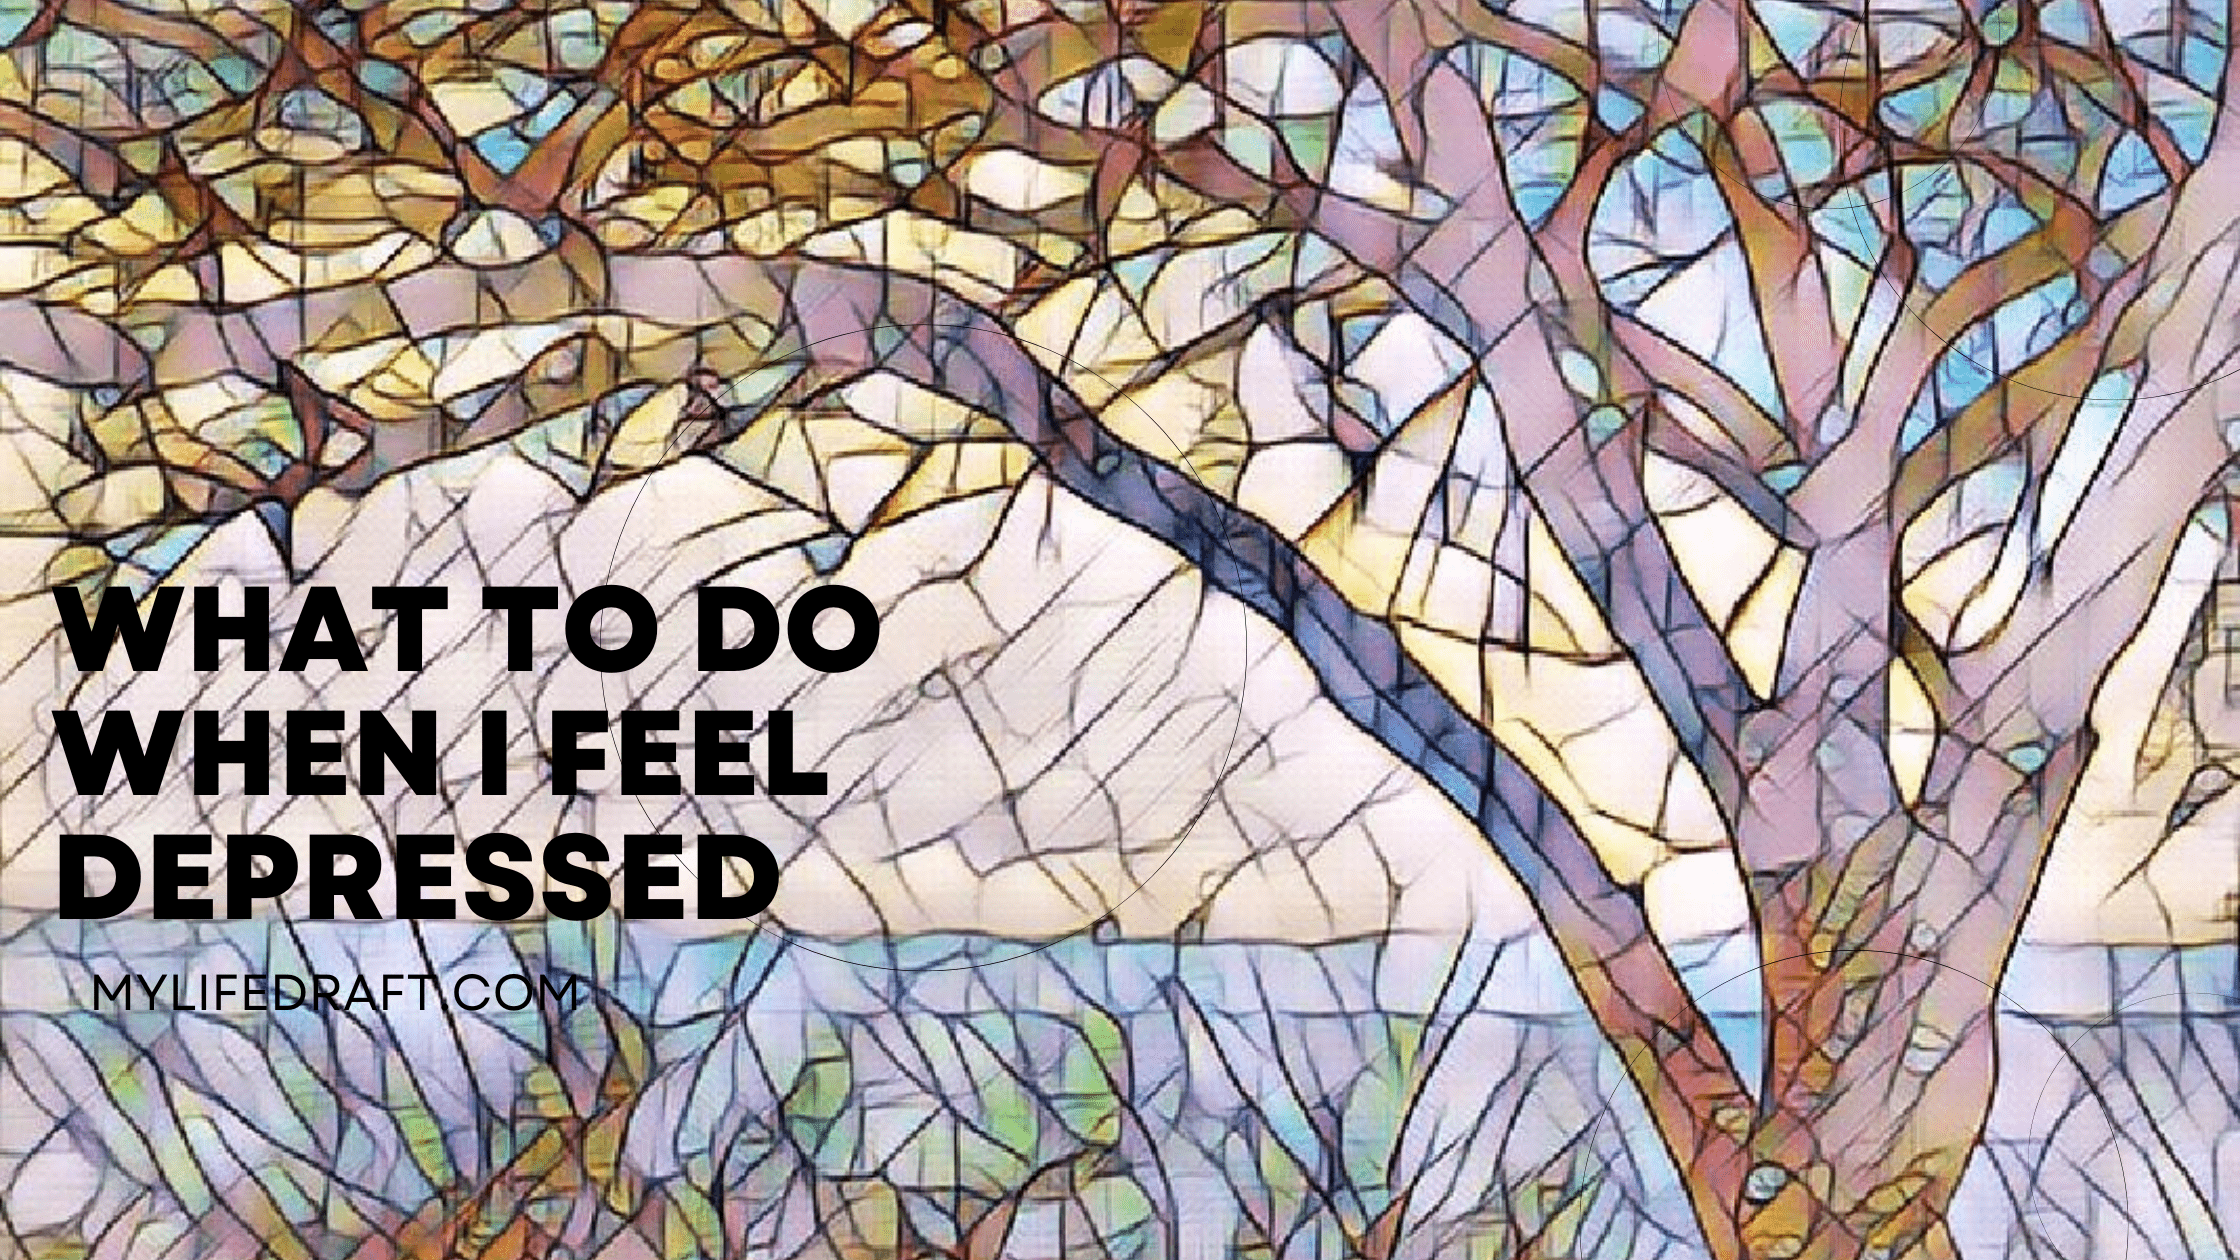 What To Do When I Feel Depressed